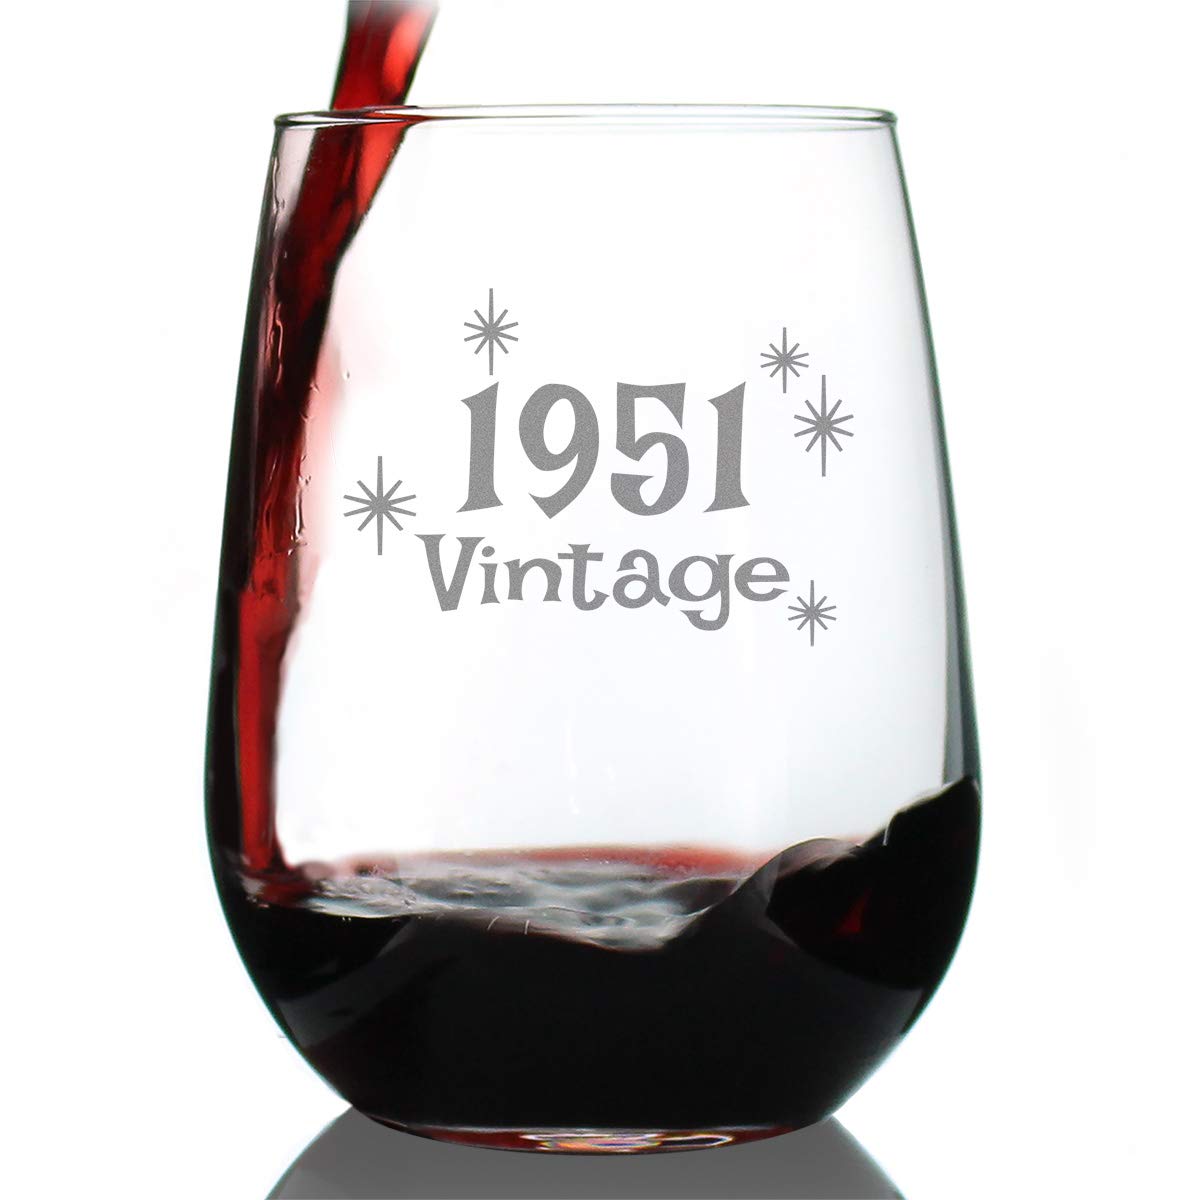 Vintage 1951-73rd Birthday Stemless Wine Glass Gifts for Women & Men Turning 73 - Bday Party Decor - Large Glasses